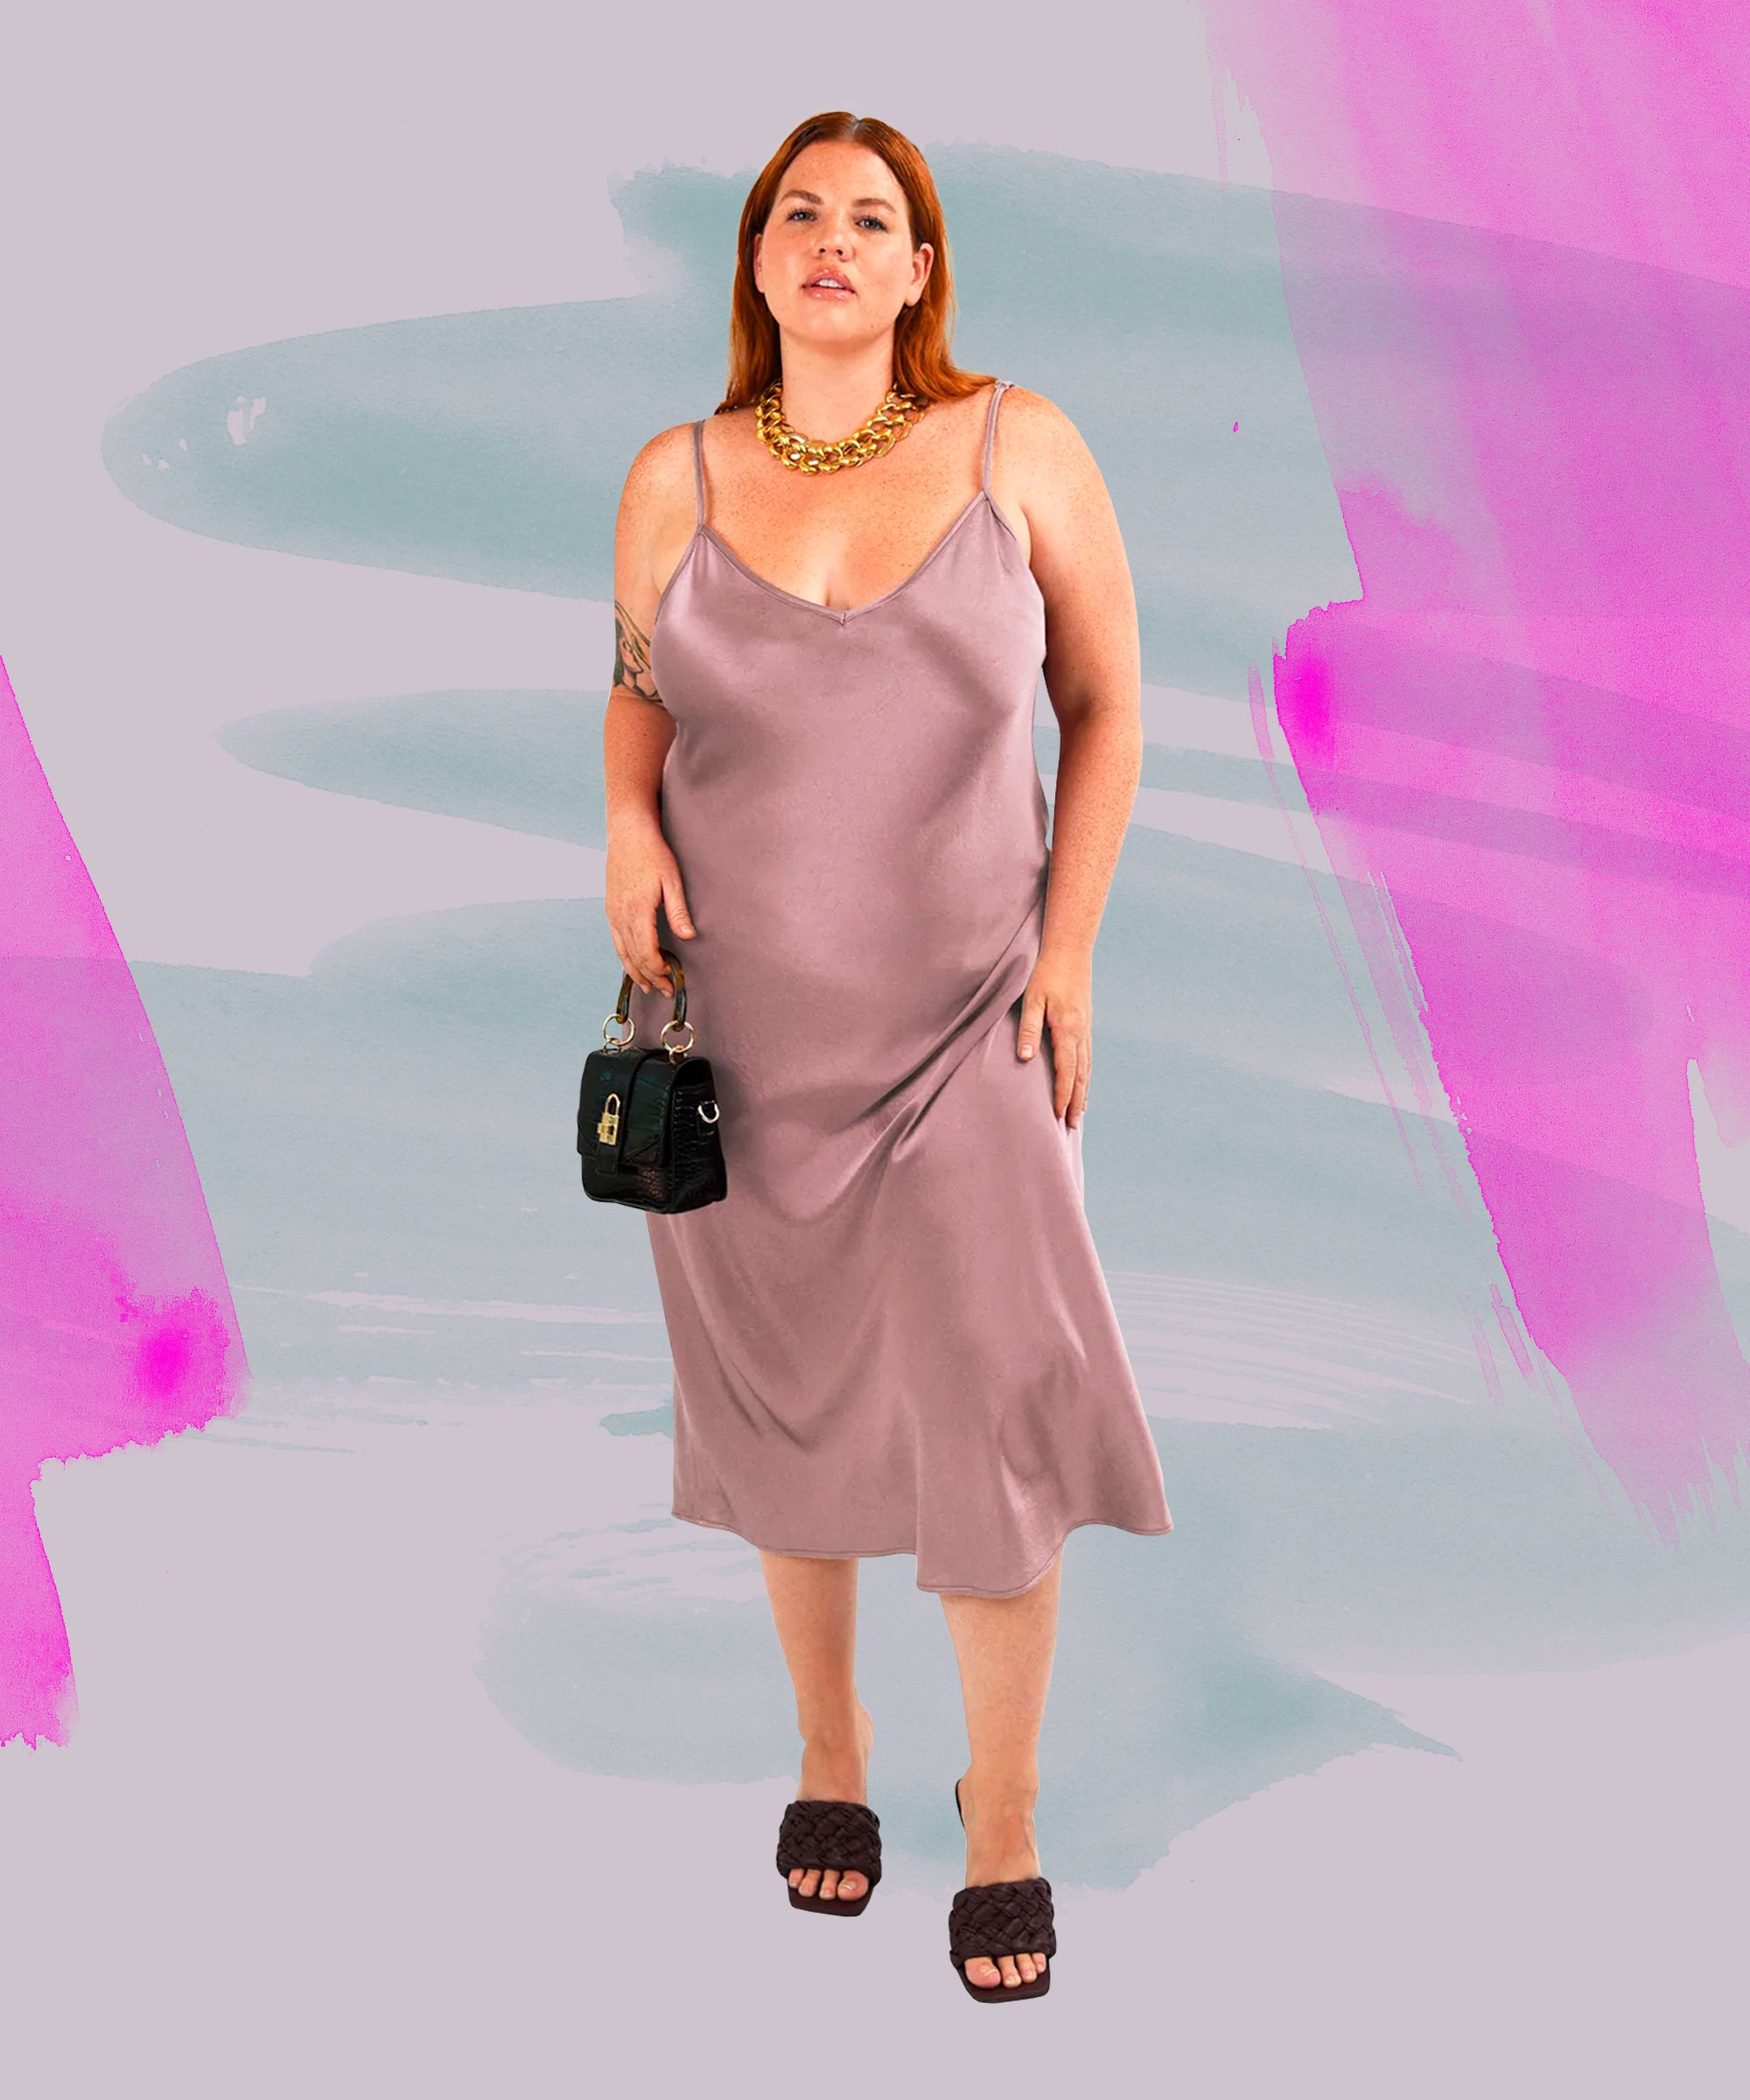 Best Plus Size Wedding Guest Dresses: Trendy and Affordable Options